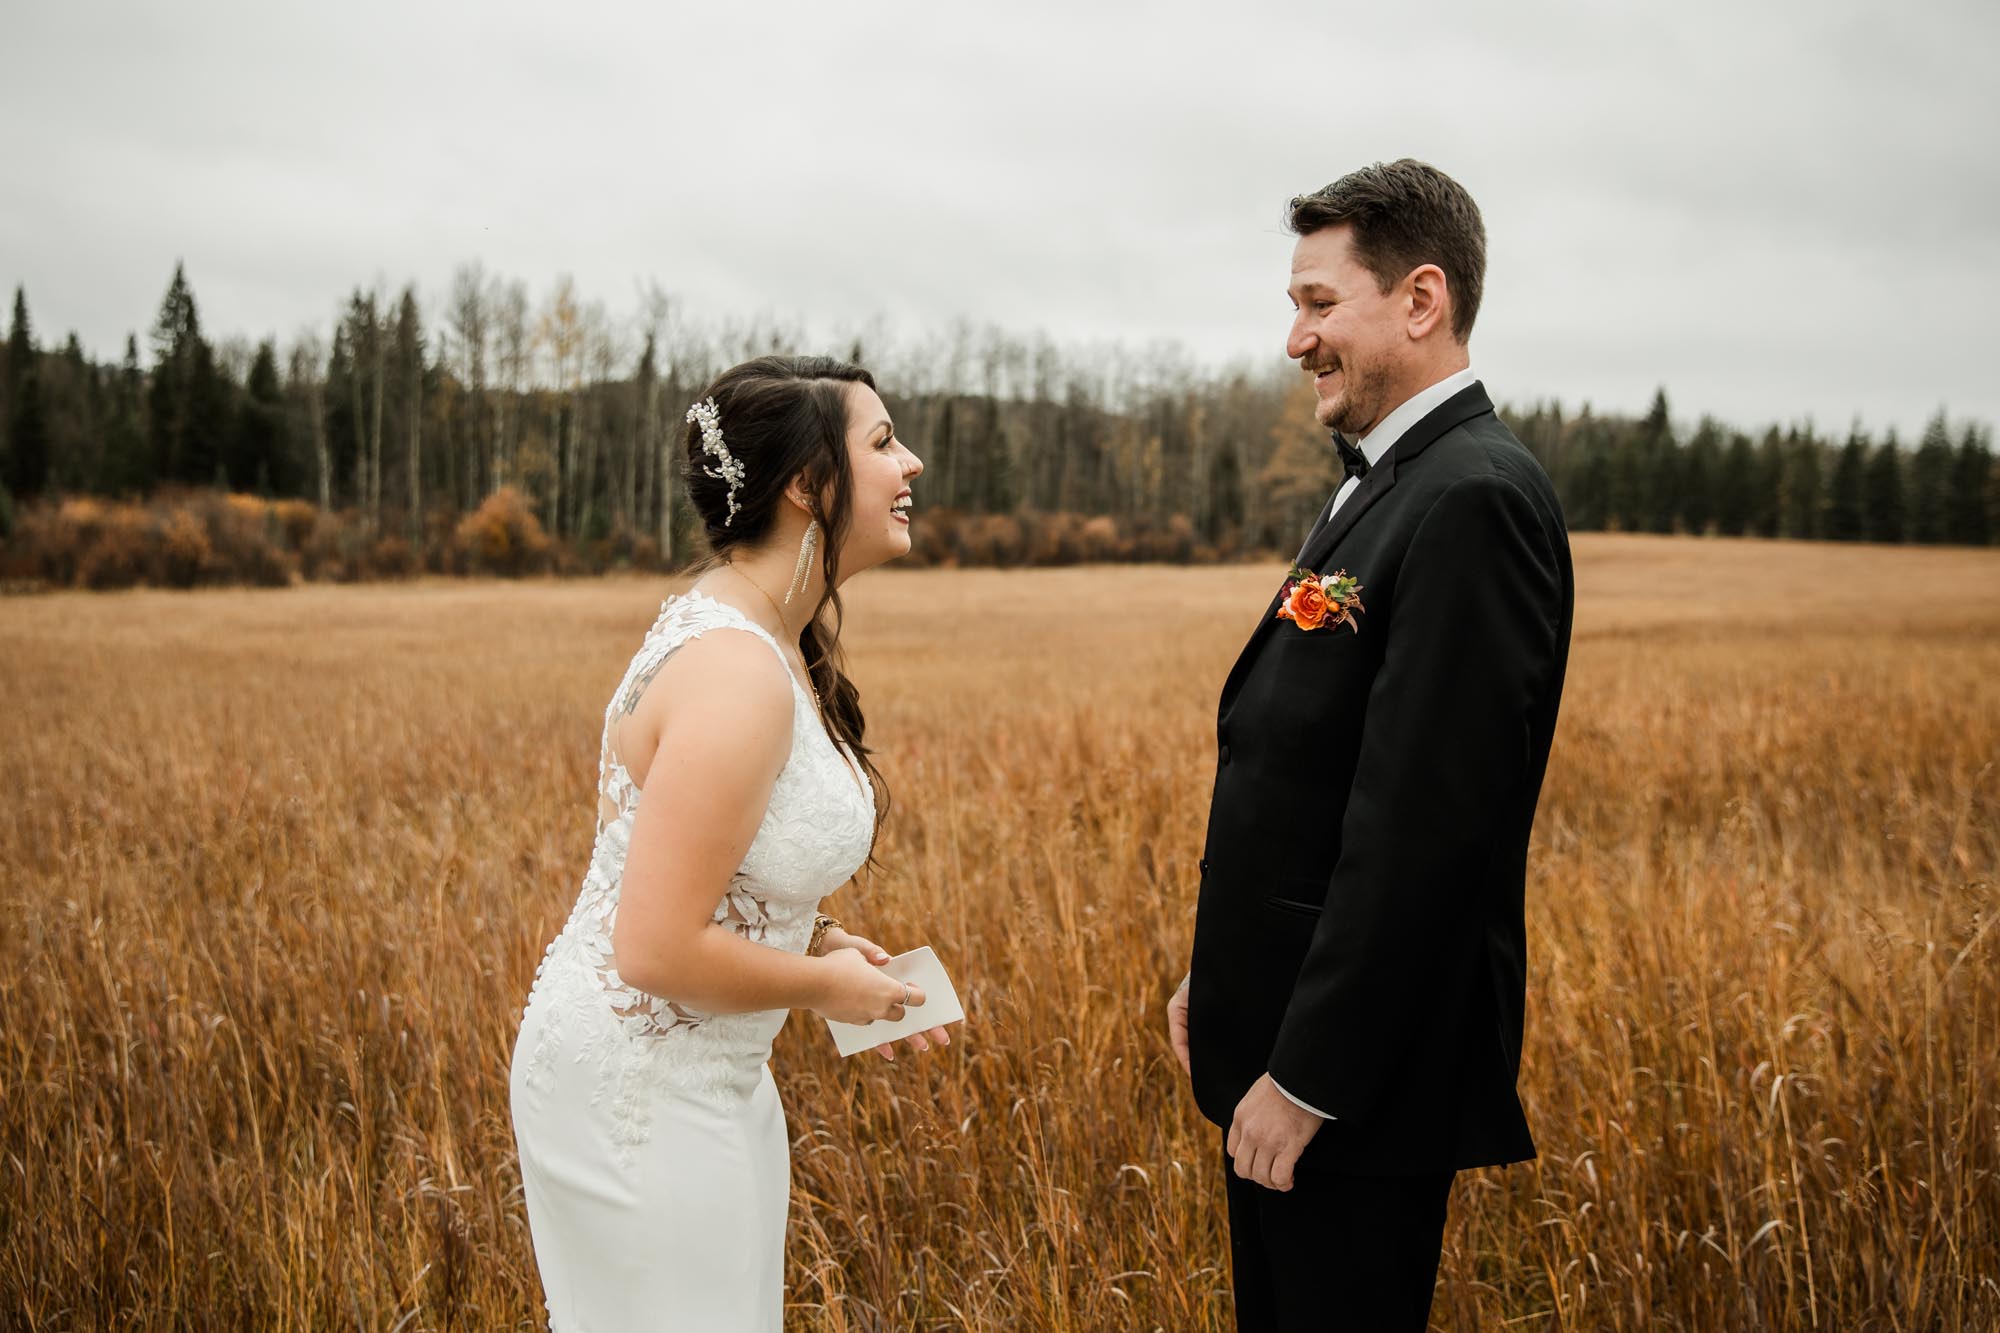 Folk Tree Lodge wedding, Calgary, Banff and Canmore wedding photographer, micro wedding, intimate ceremony on a beautiful rustic lodge property outside of Bragg Creek by Kananaskis Country